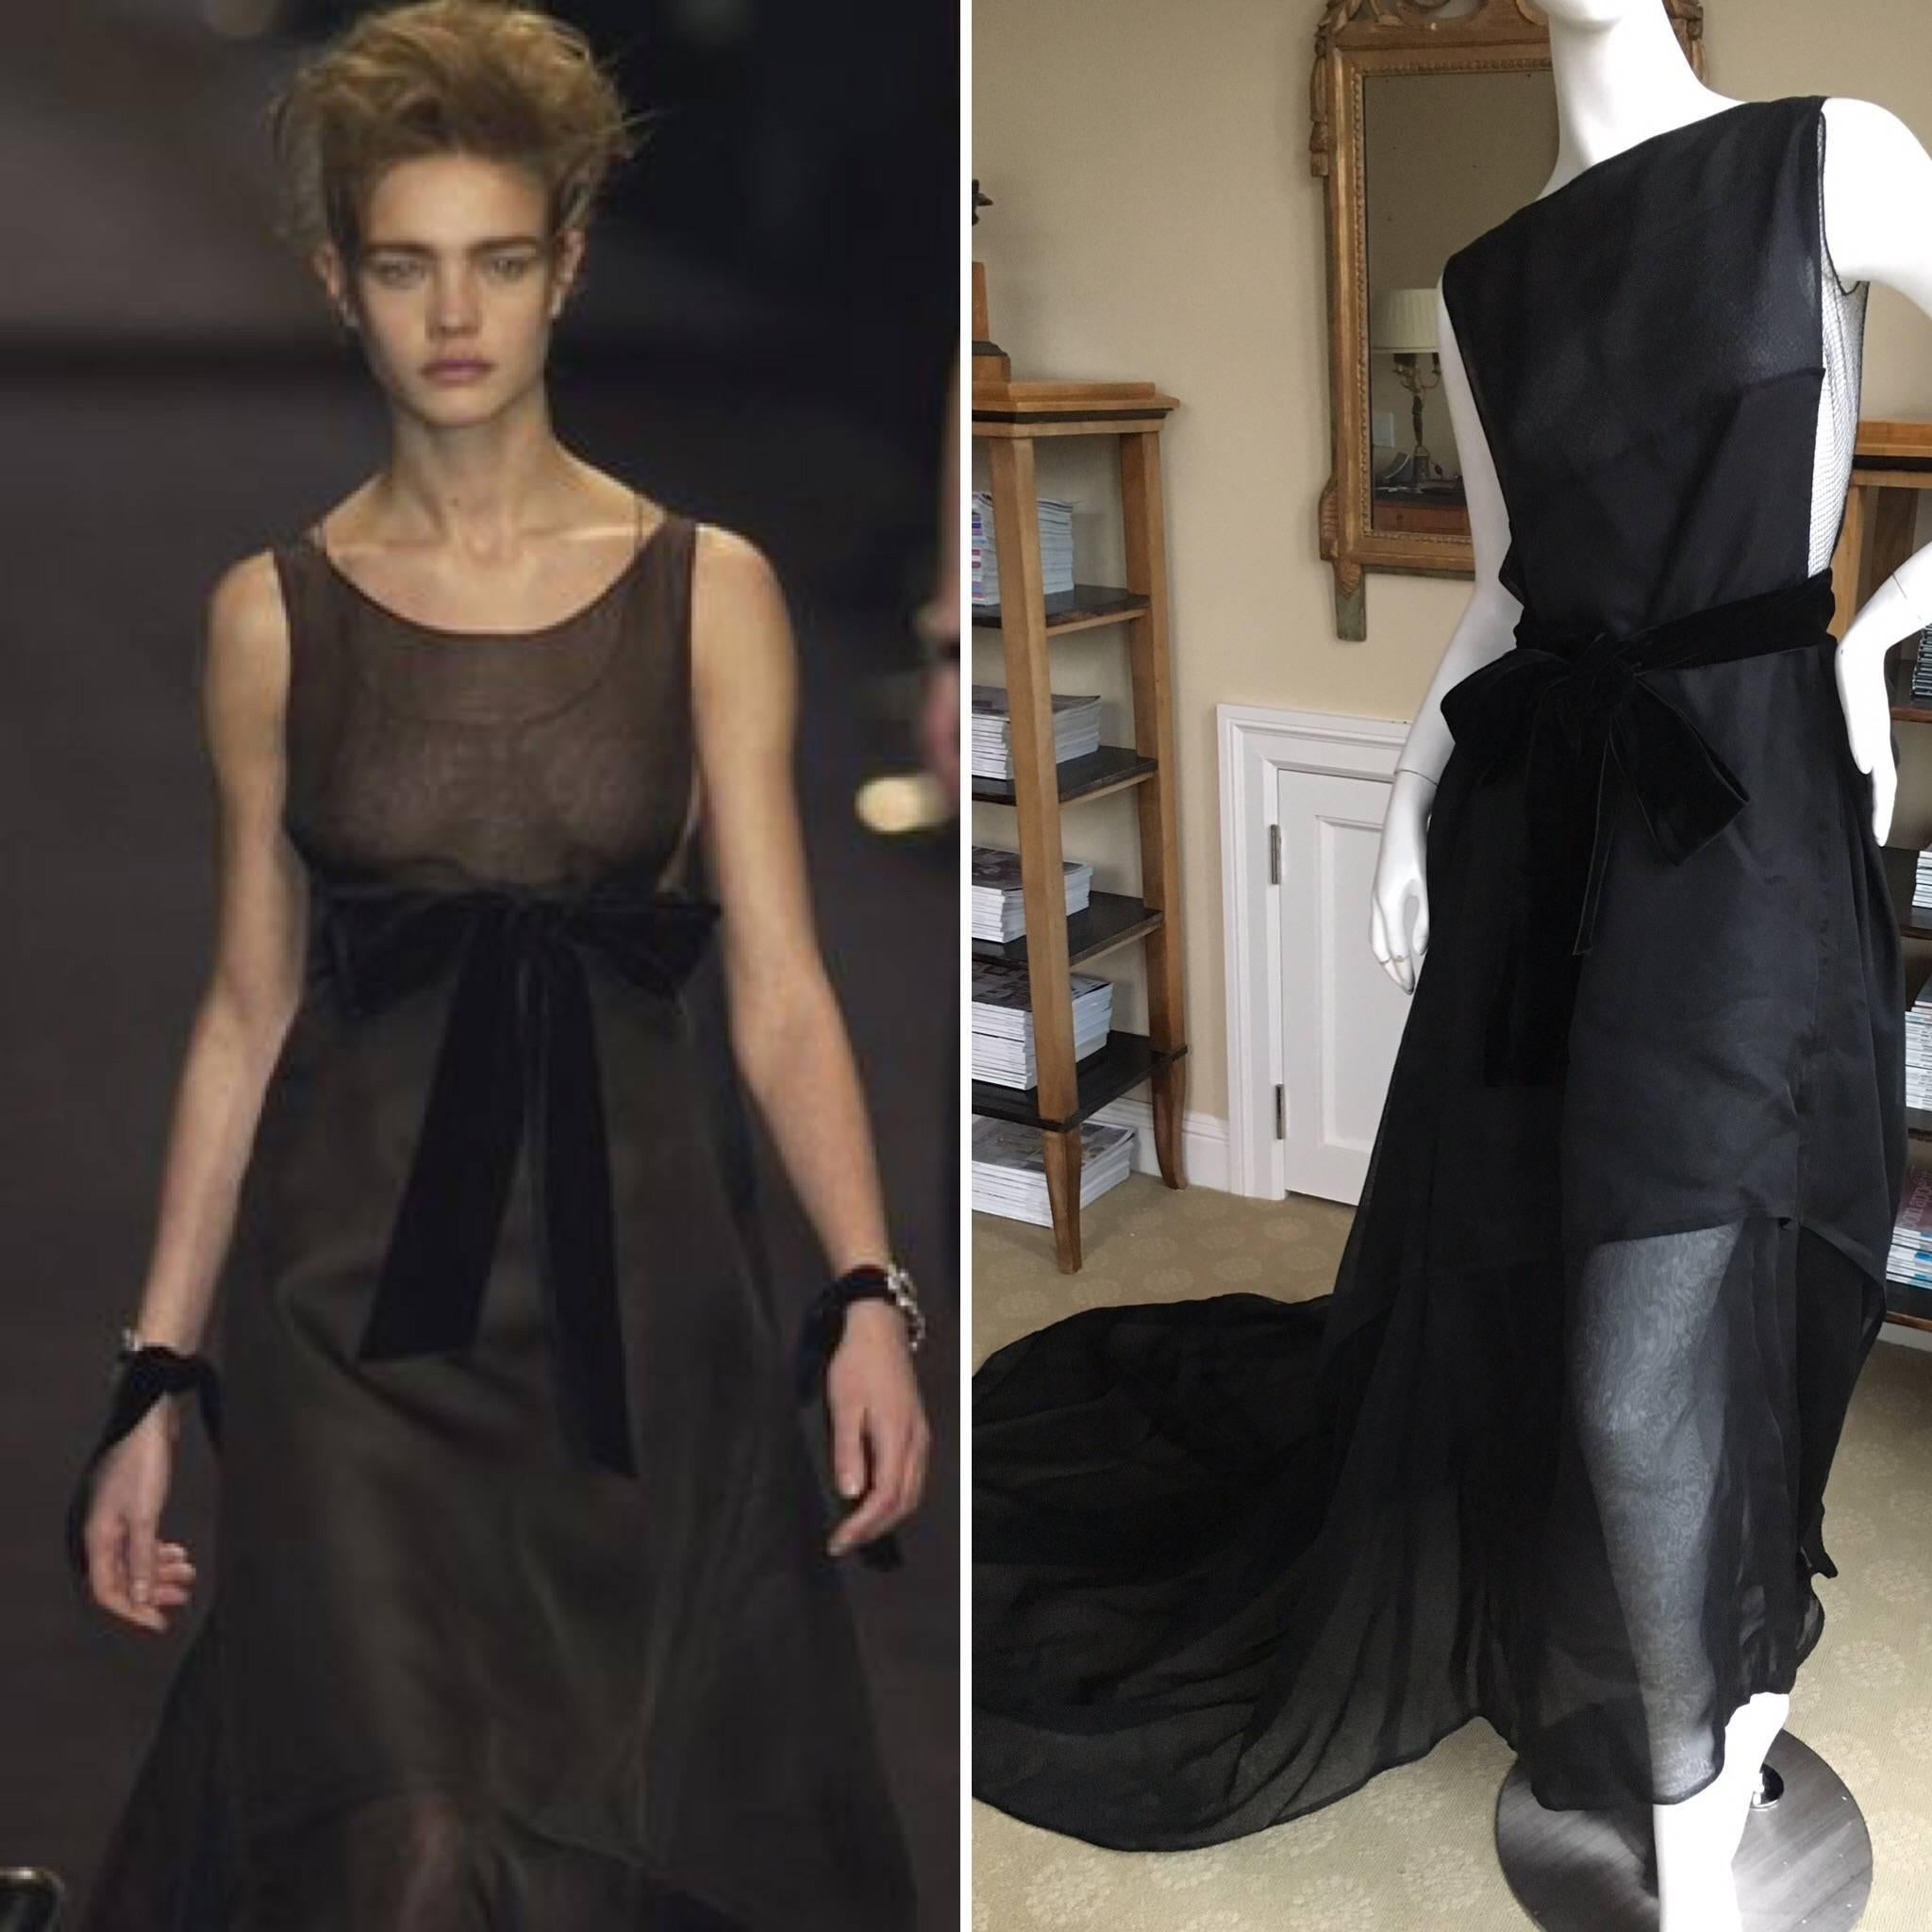 Saint Laurent by Tom Ford Fall 2002 Final Look Black Wedding Dress modeled by Natalia Vodianova
This is an astonishing piece, it has three parts.
 A very fine net tank, the dress with a mile long train, and the velvet sash.
There is no size tag,